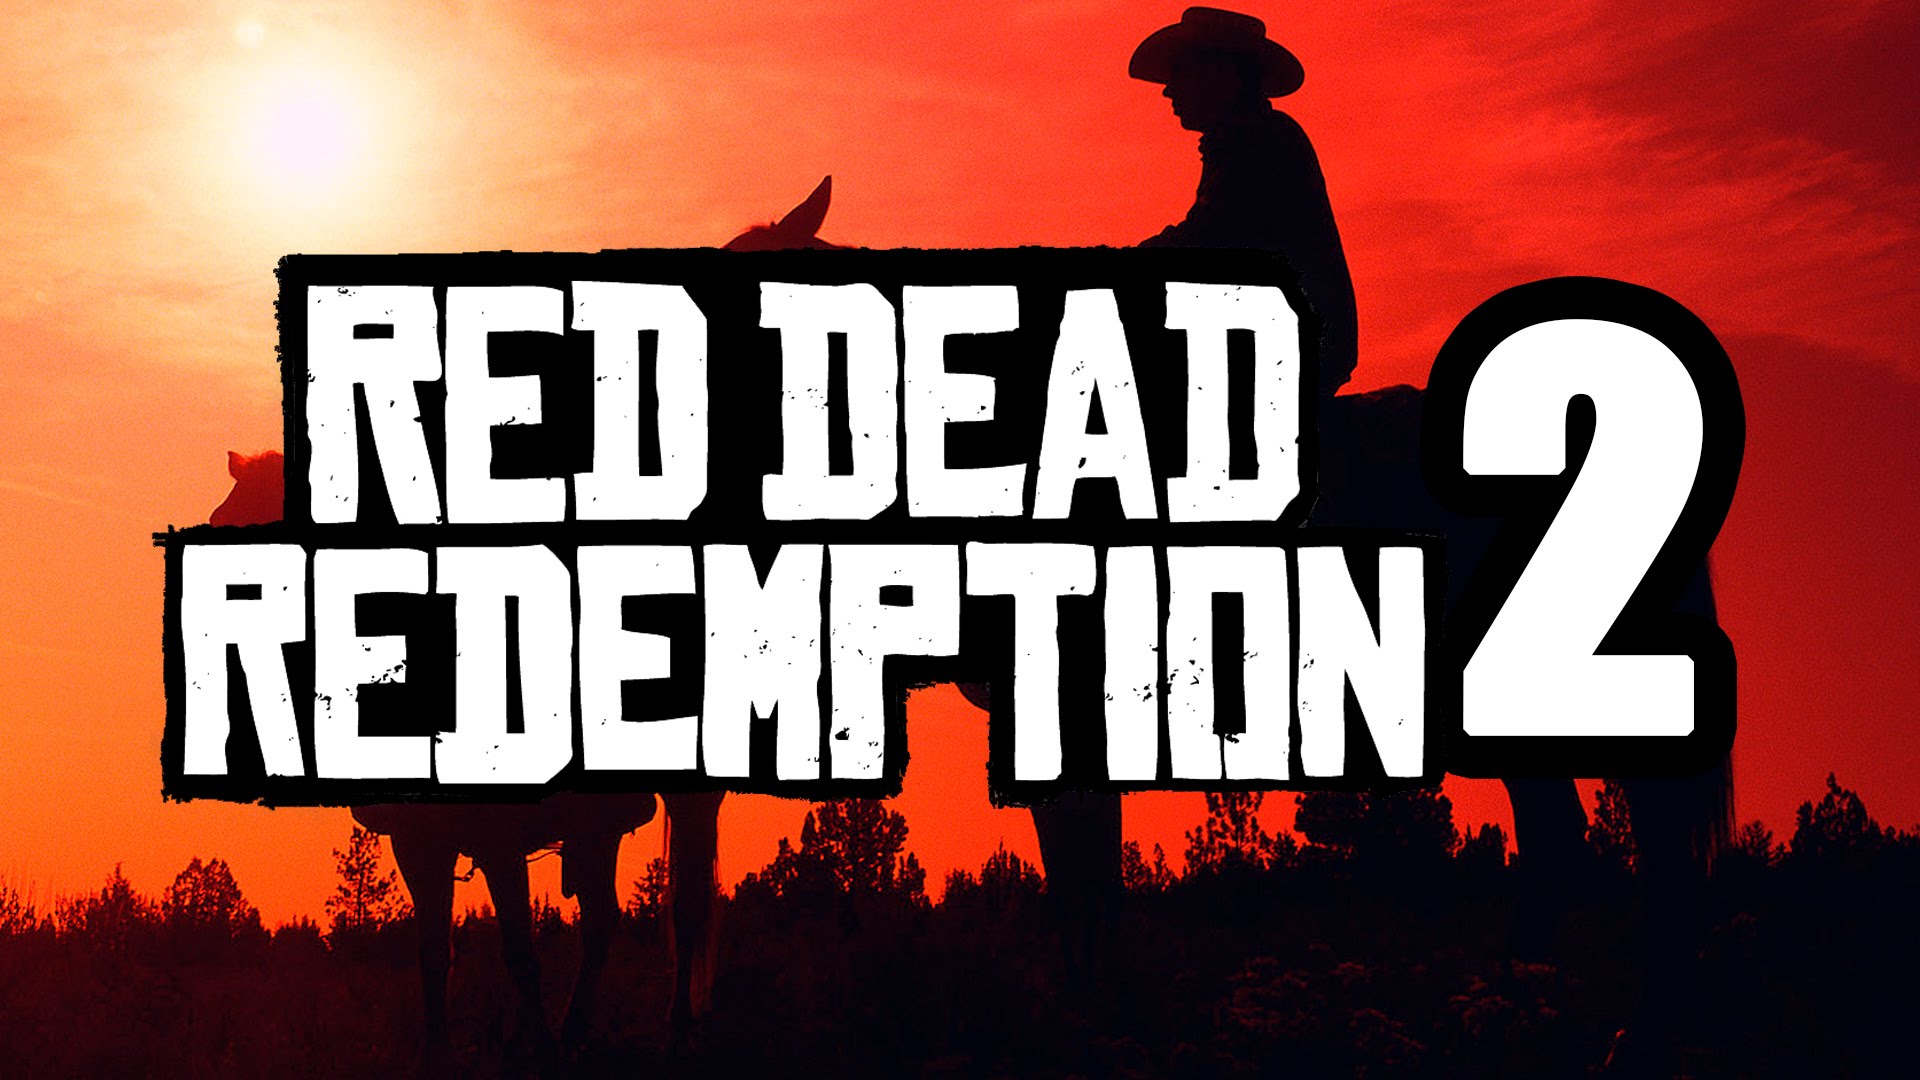 Red Dead Redemption 2 – Time To Meet The Gang Members